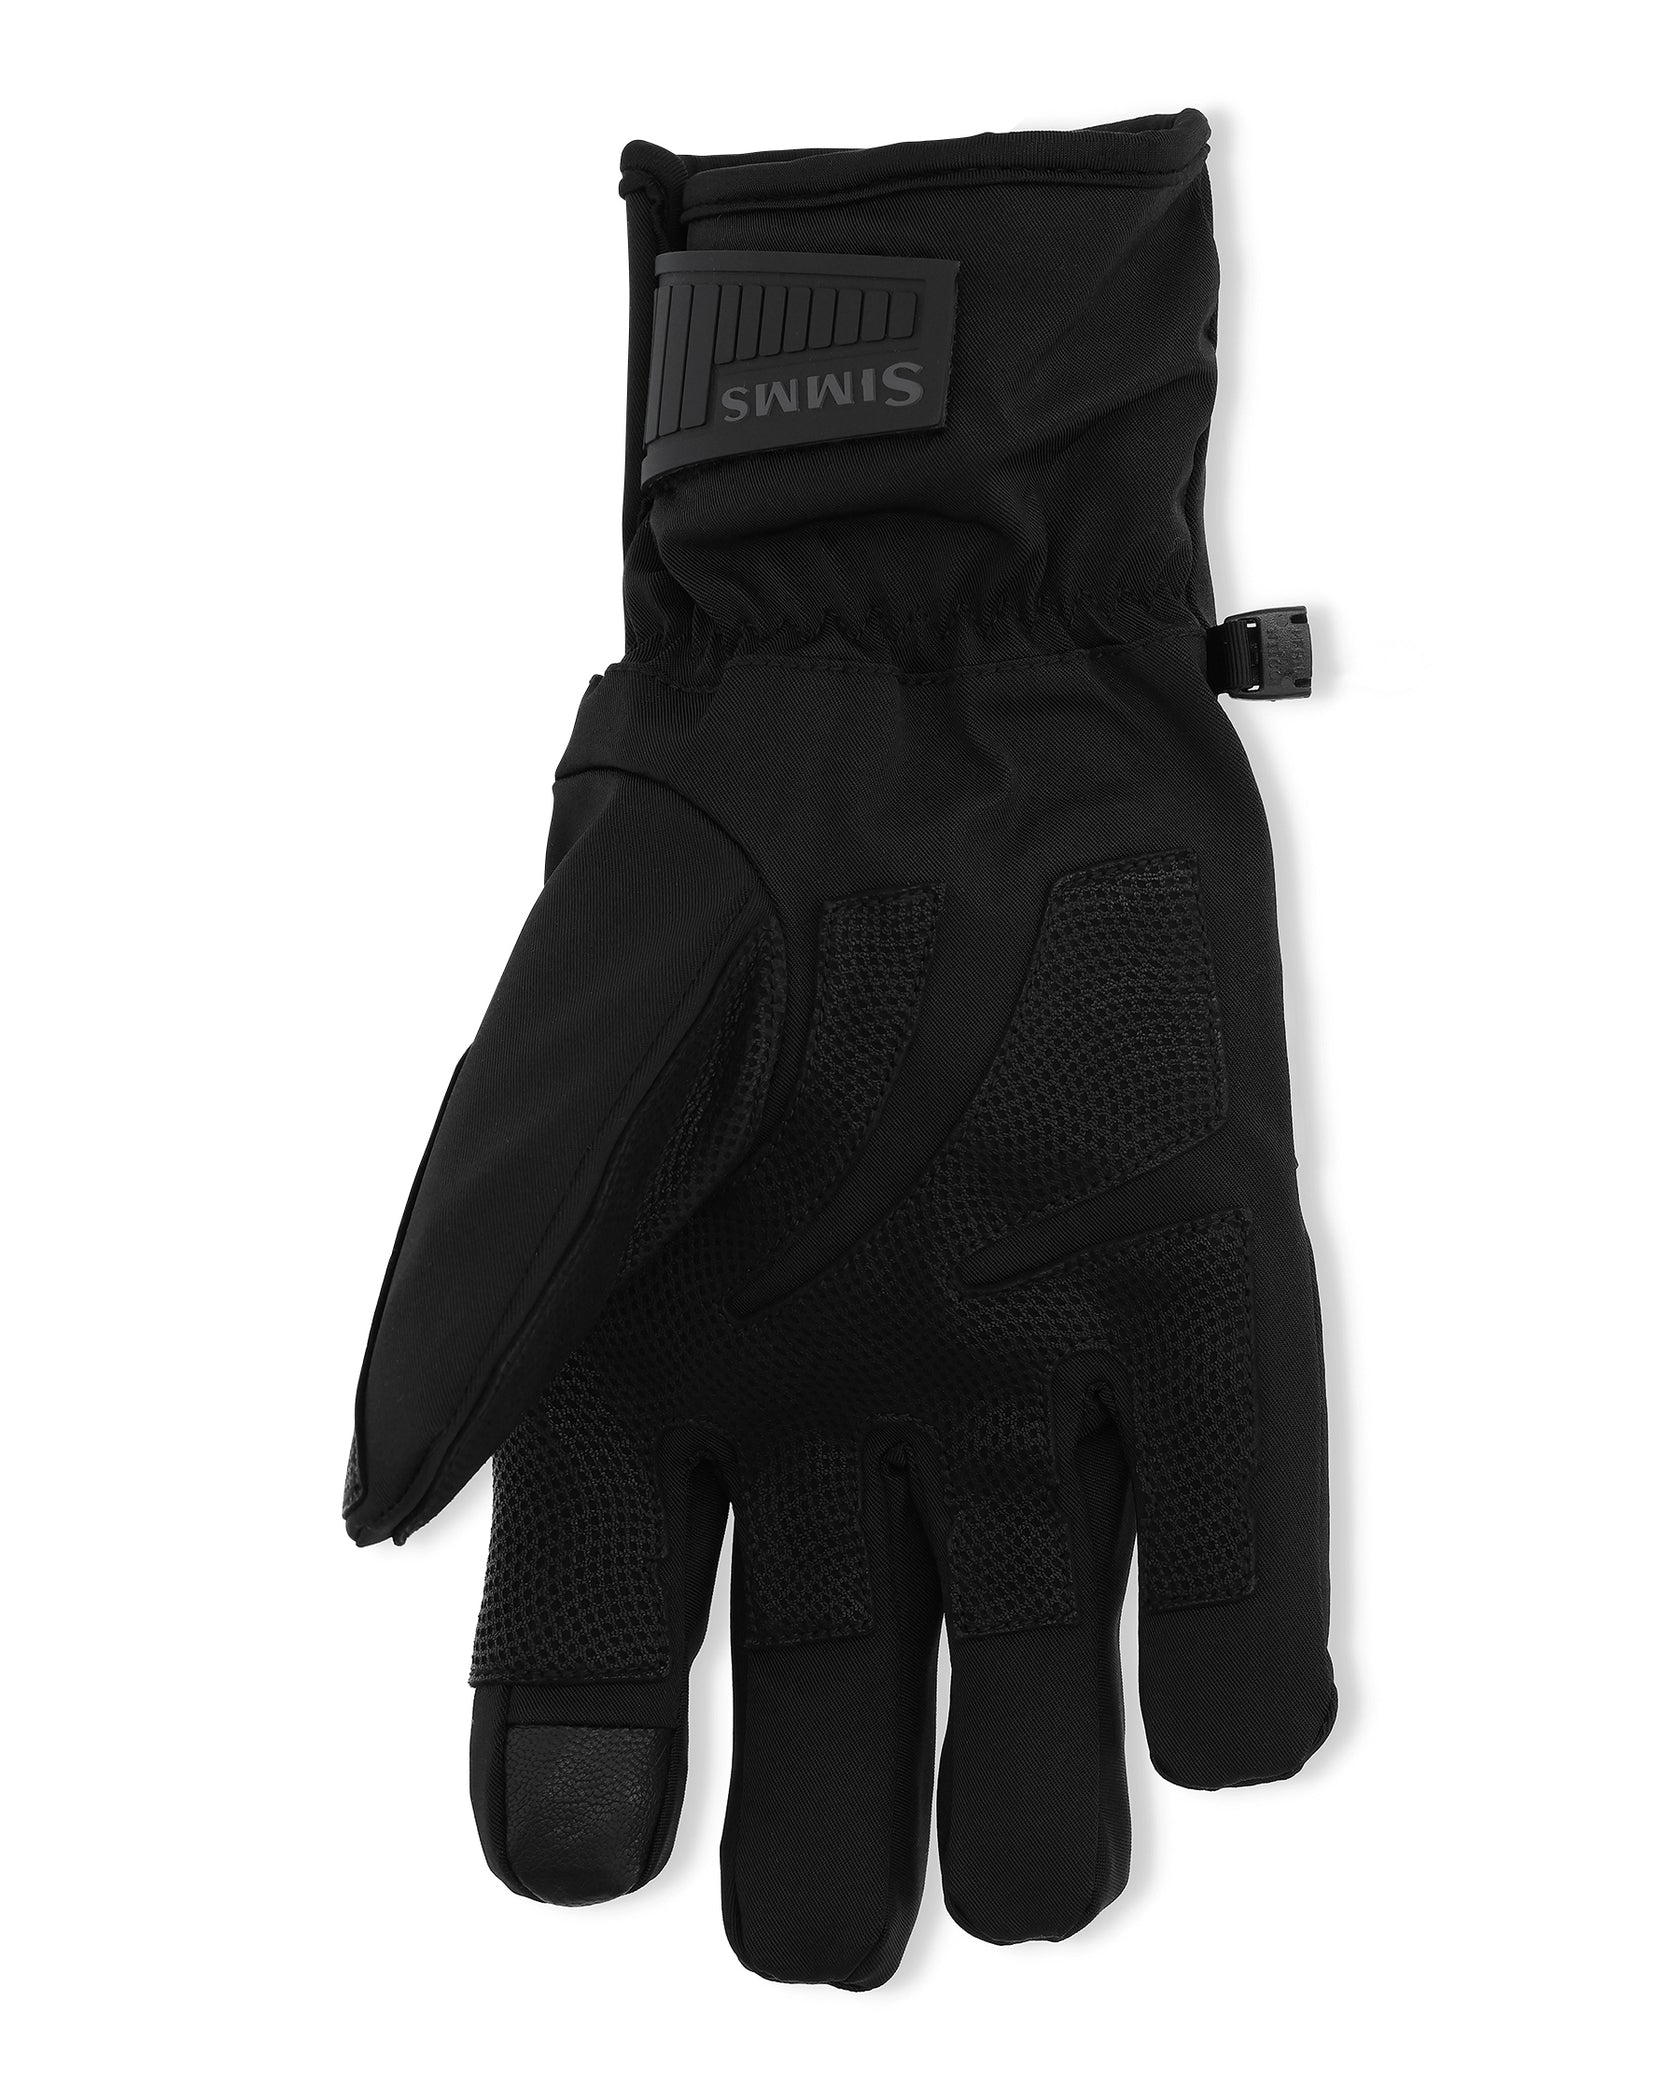 ProDry™ GORE-TEX Fishing Glove + Liner | Simms Fishing Products